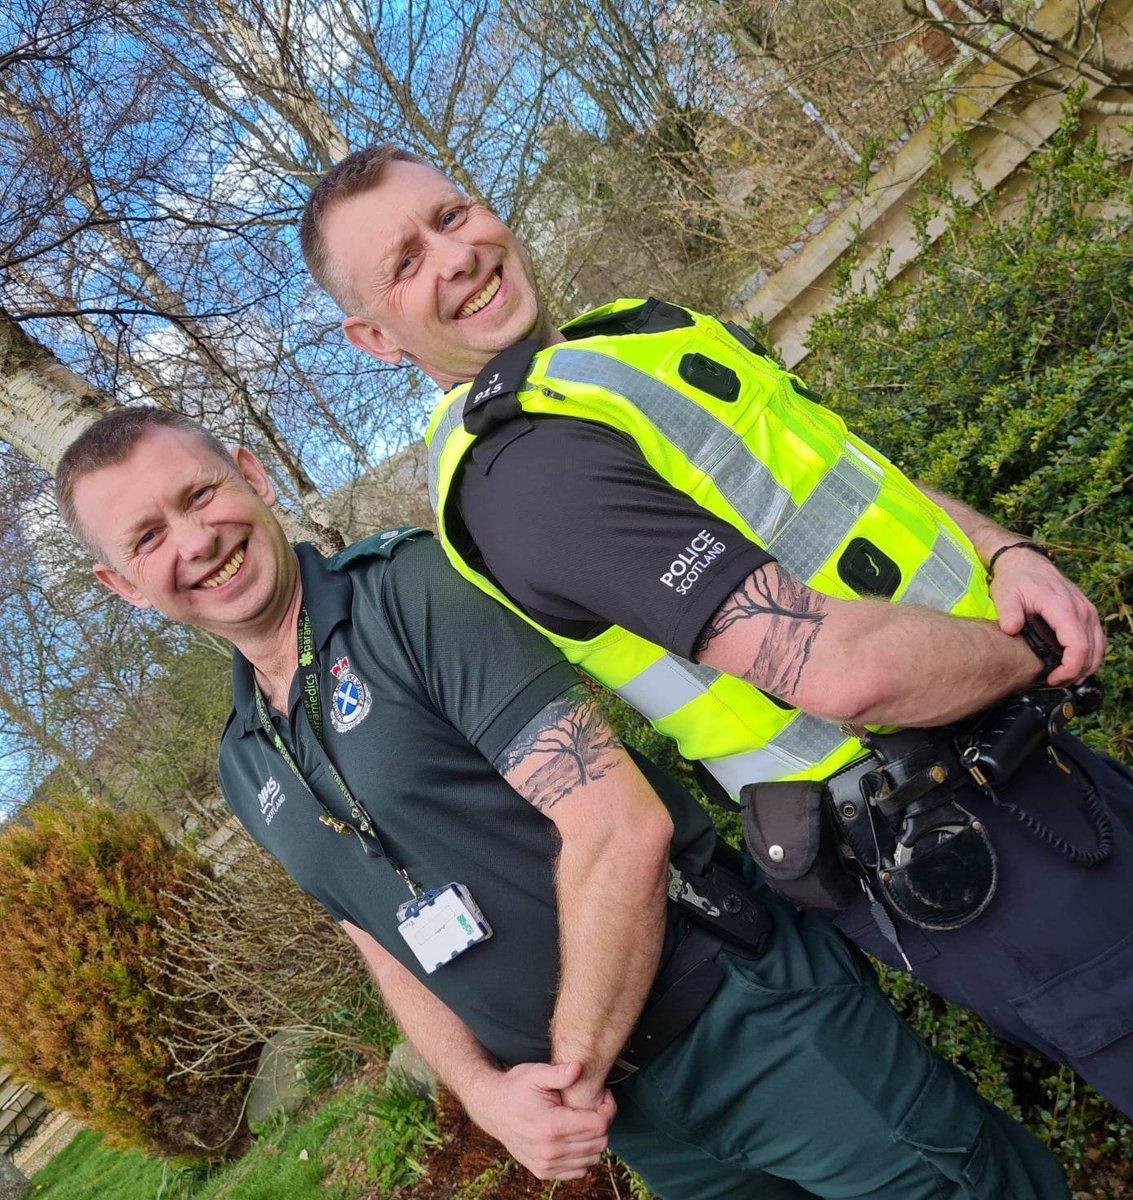 Today is #999Day

SAS Paramedic Lee Myers and his twin Liam, DC for Police Scotland always knew they would join the emergency services so they could help others.

Thank you to Lee, Liam and all our emergency services personnel who make it their duty to serve the public